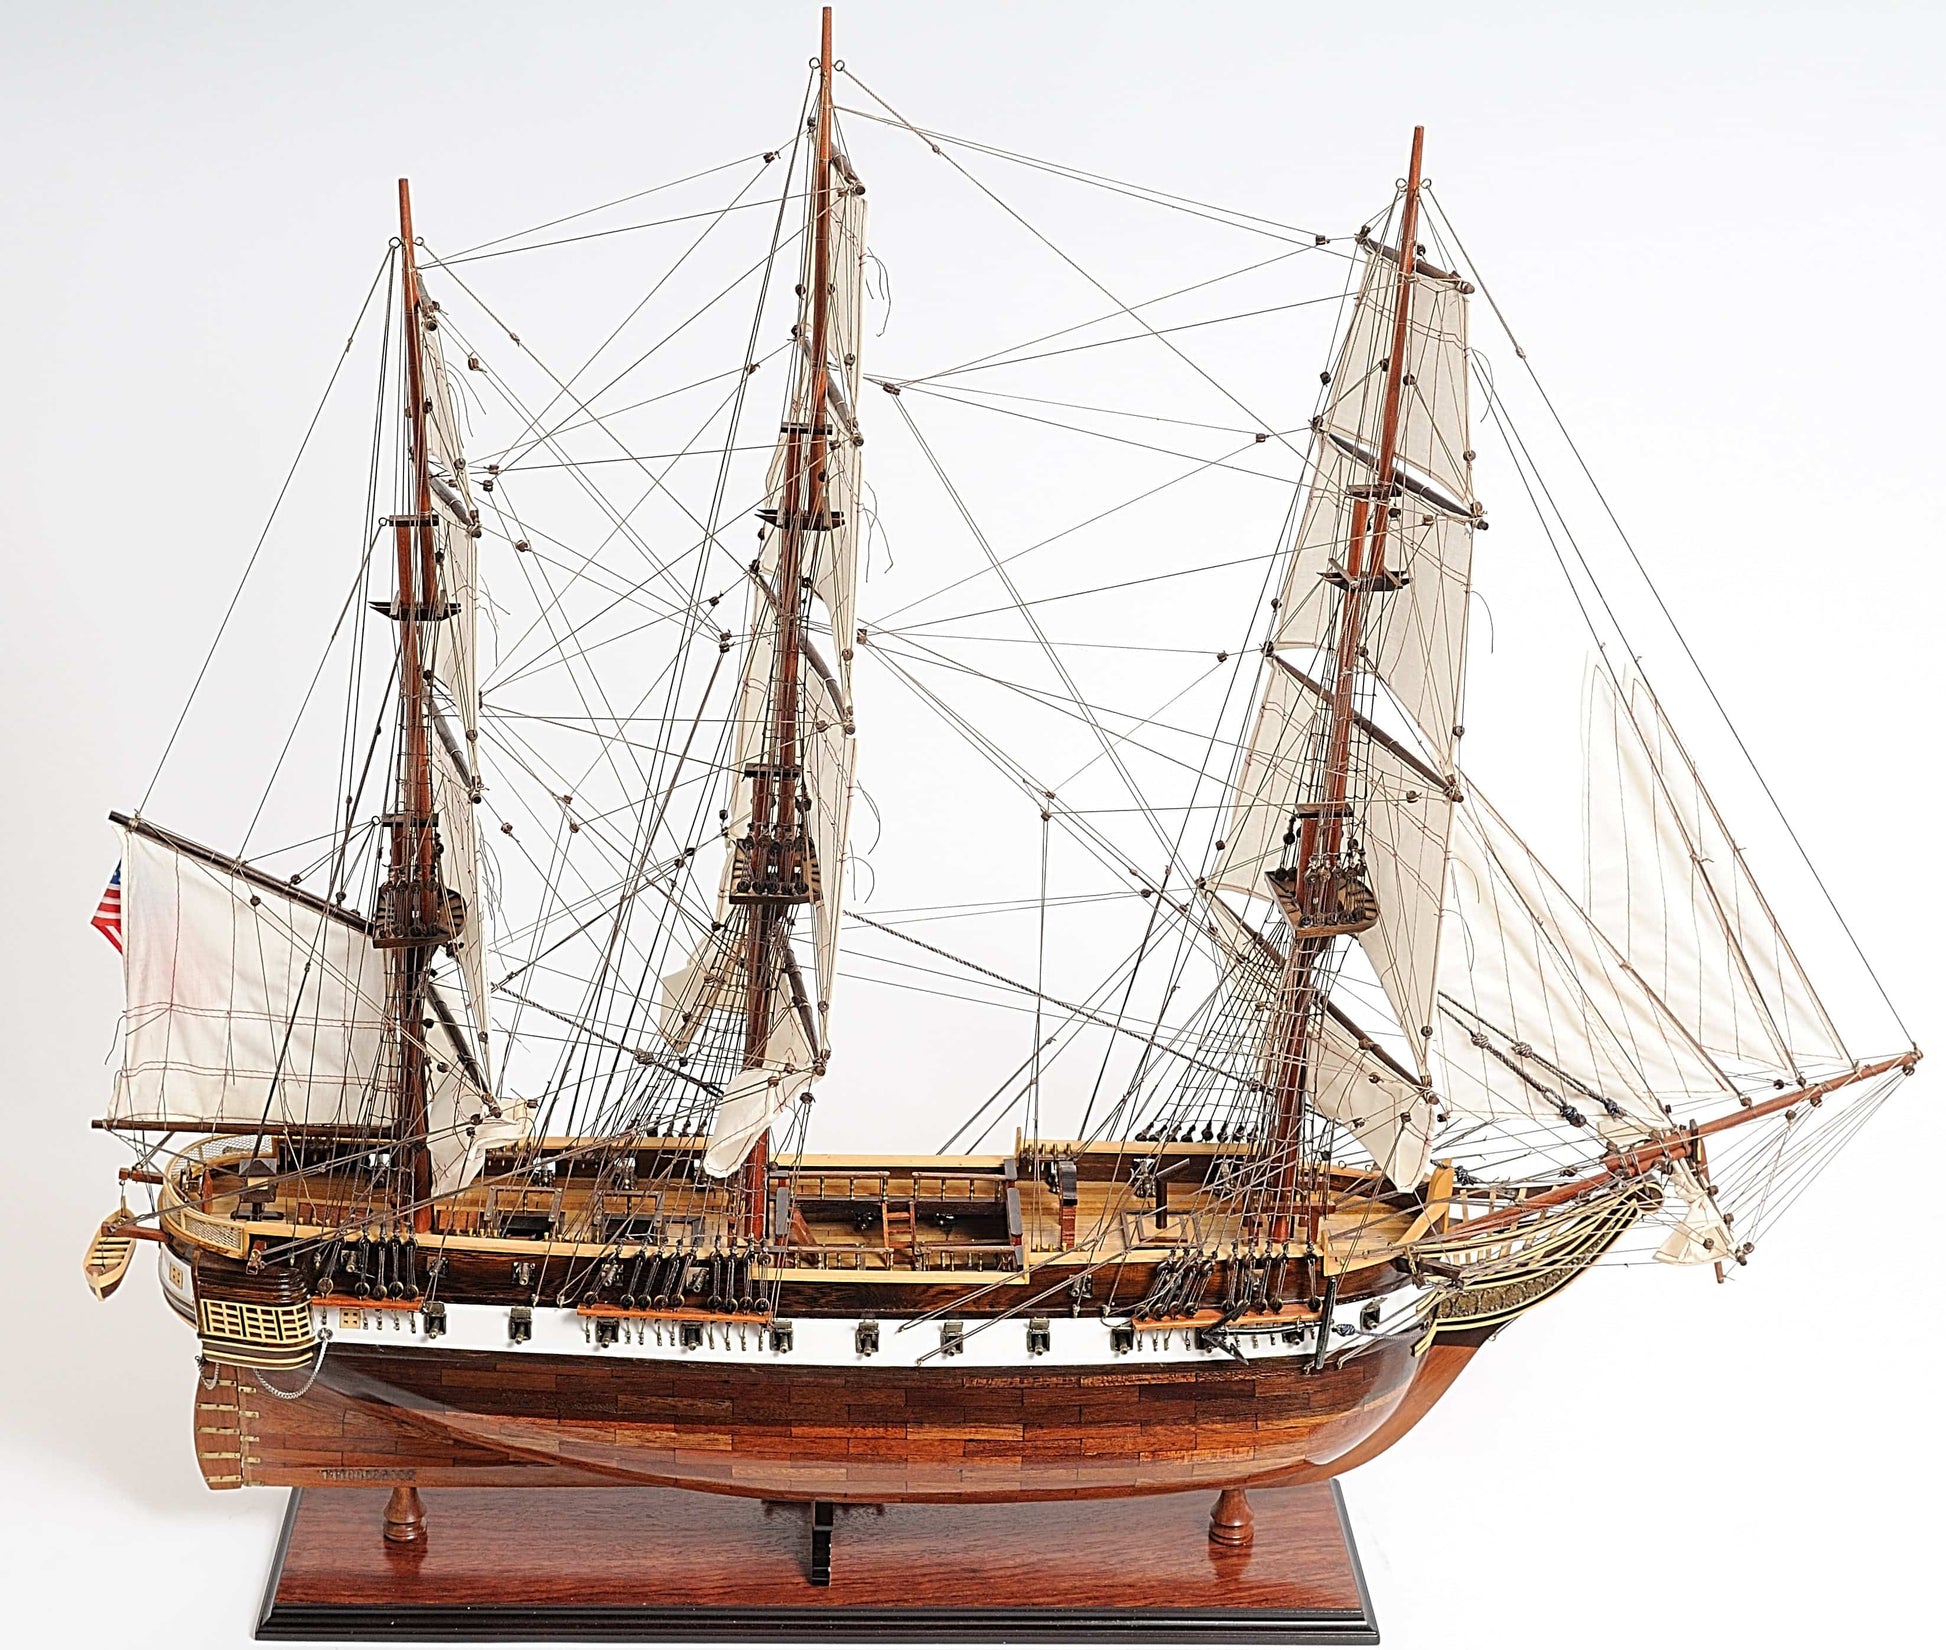 ALDO Hobbies & Creative Arts> Collectibles> Scale Model United States Navy USS Constellation Tall Ship Xtra Large  Wood Model Sailboat Assembled